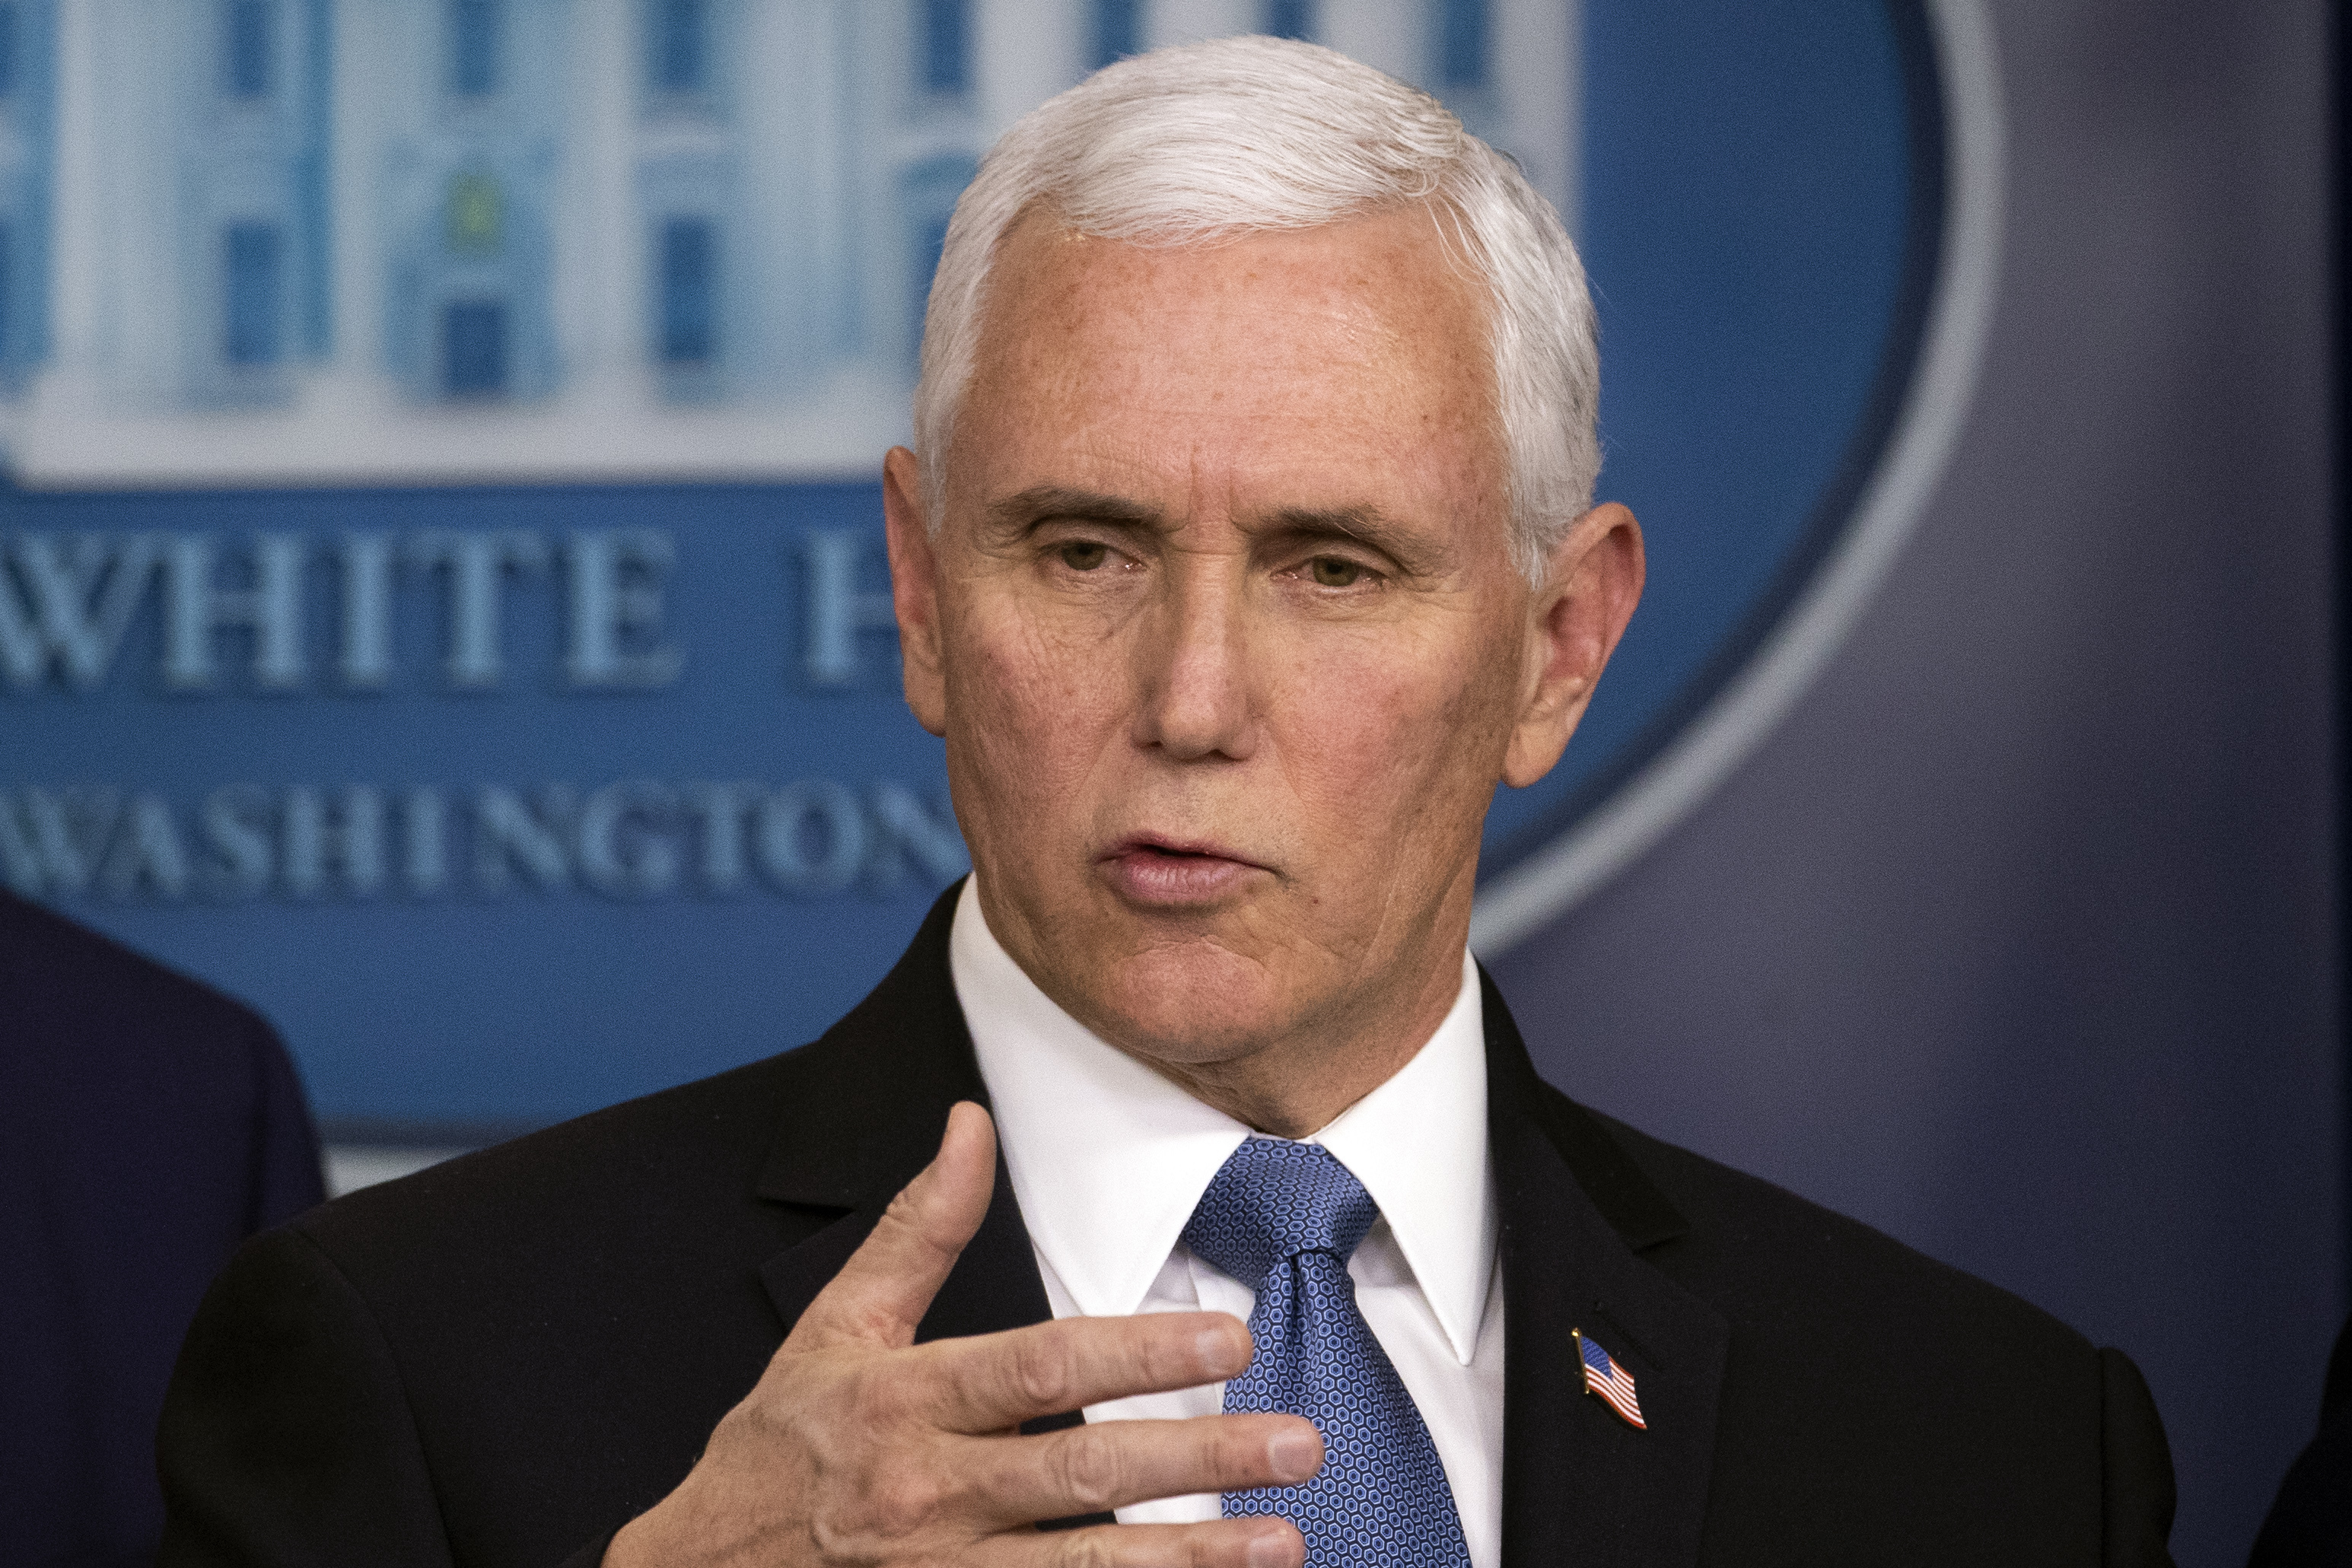 Classified Documents Found at Mike Pence's Indiana Home, Lawyer Says